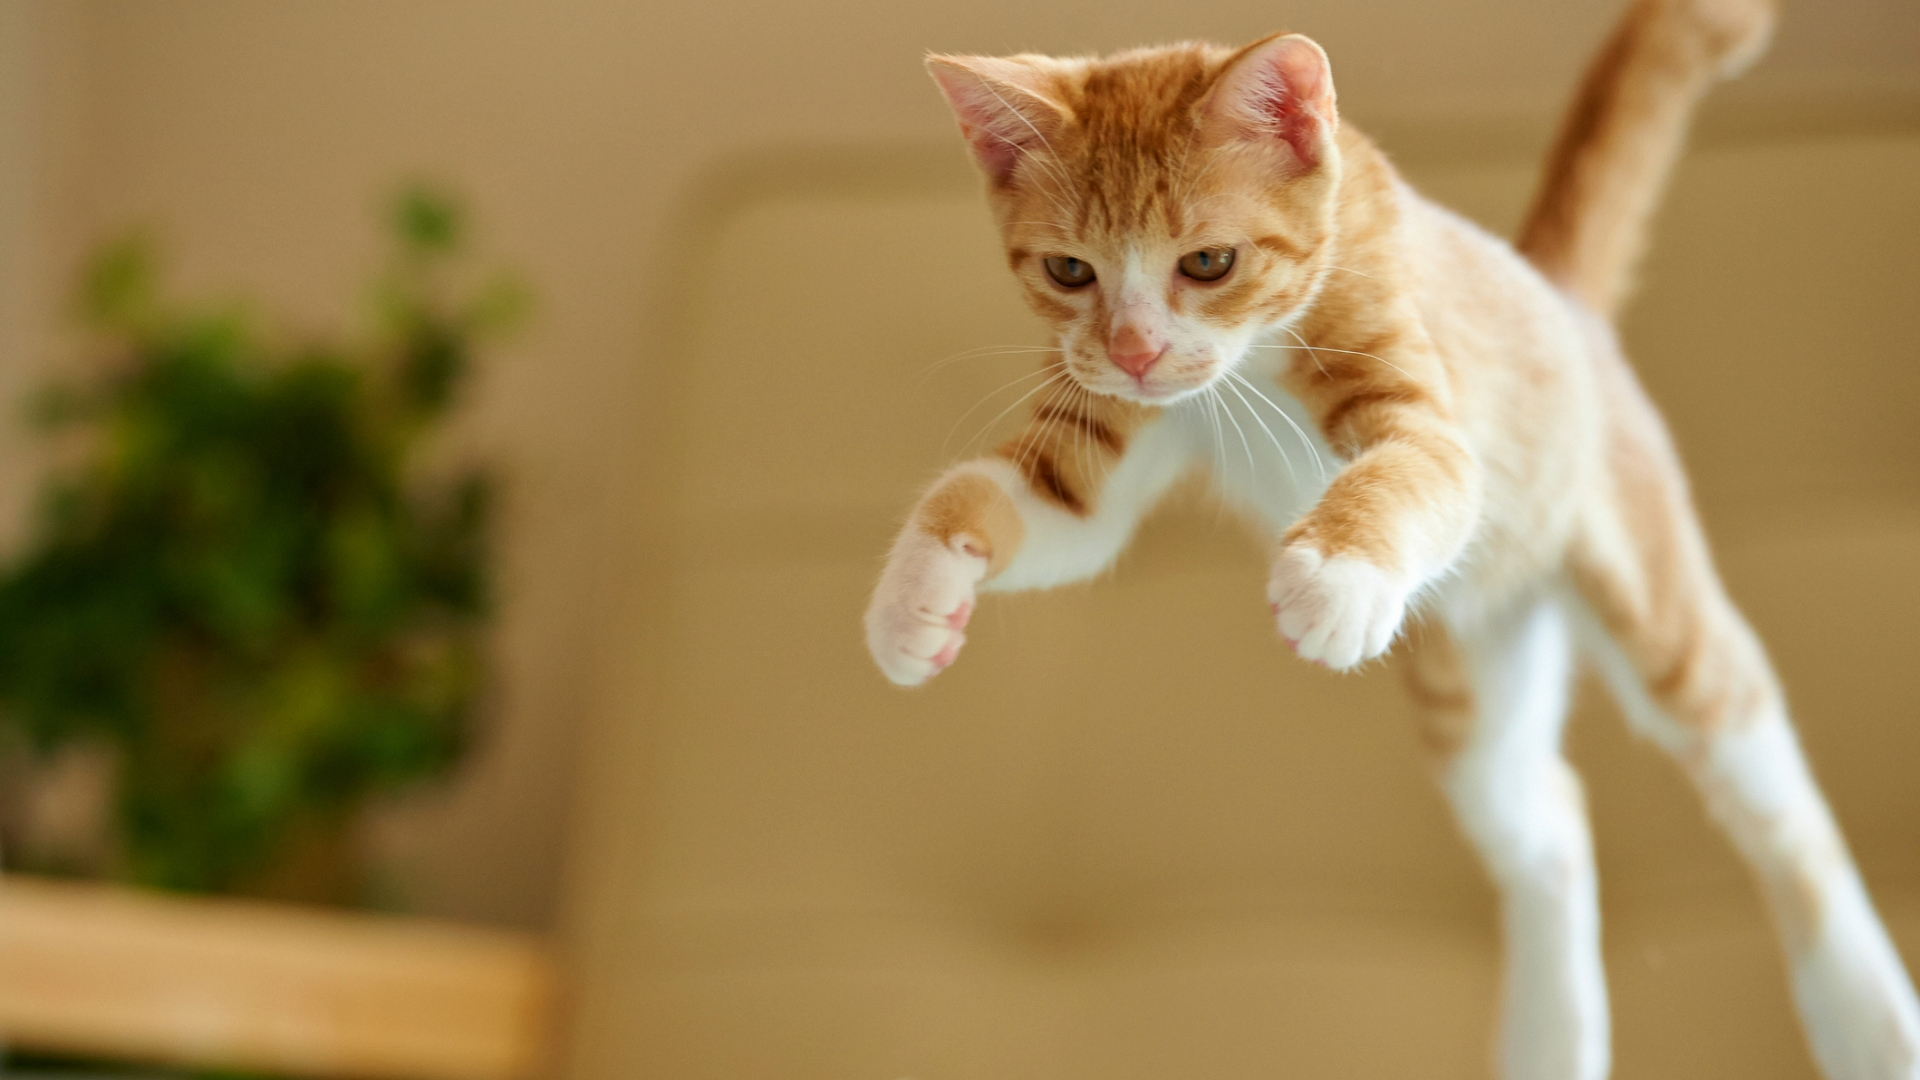 Ginger and white kitten jumping in the air